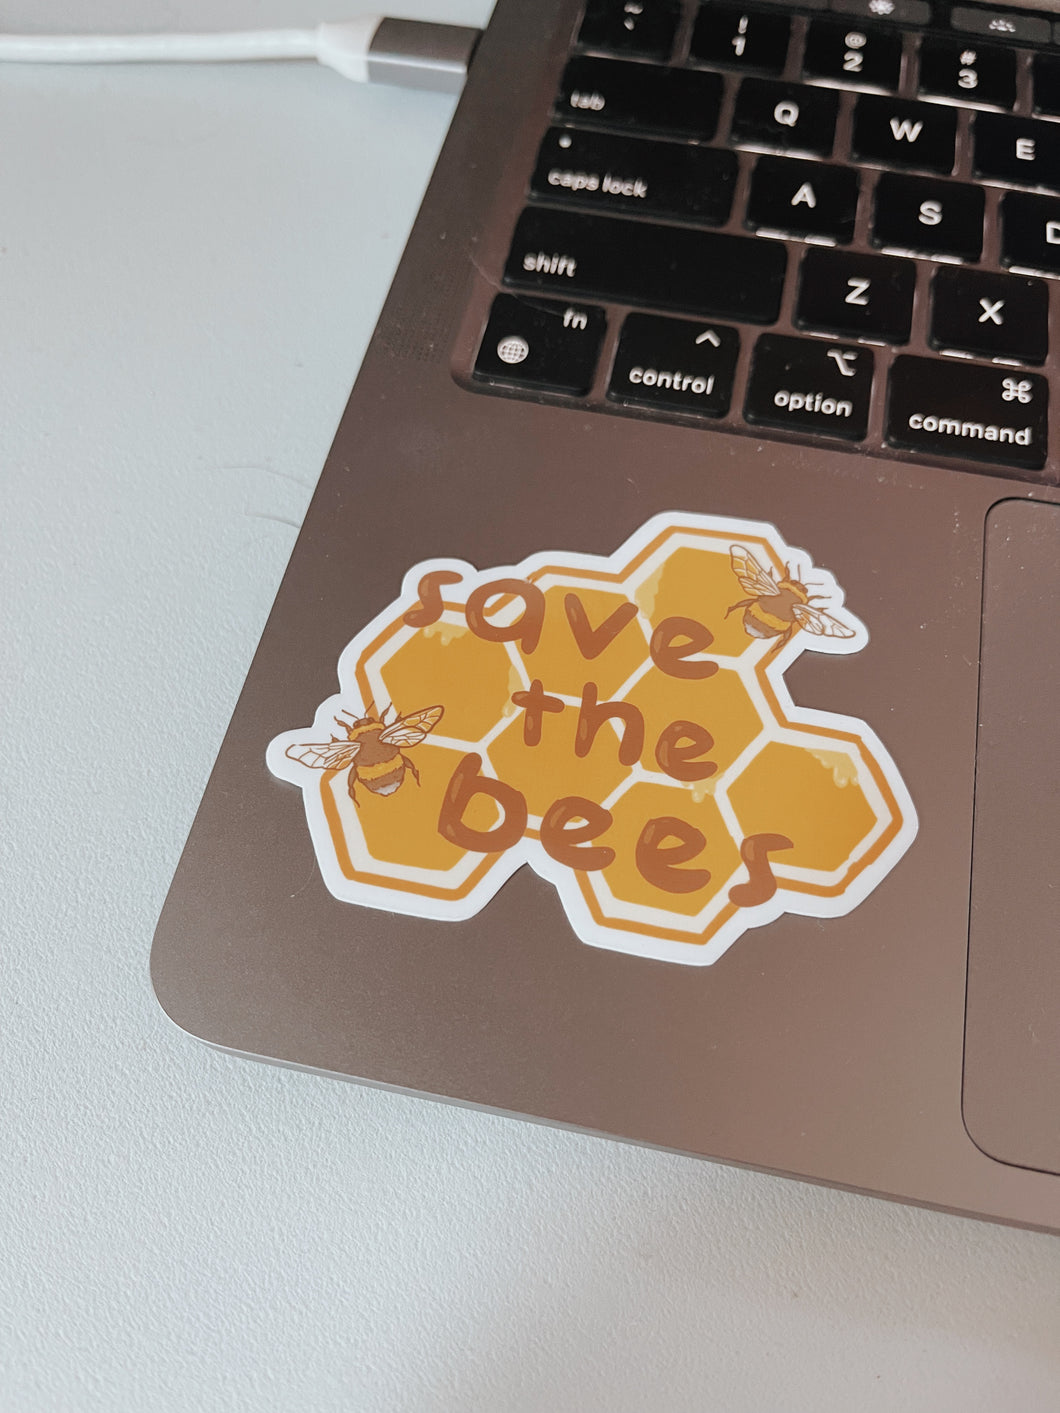 Save the Bees Sticker